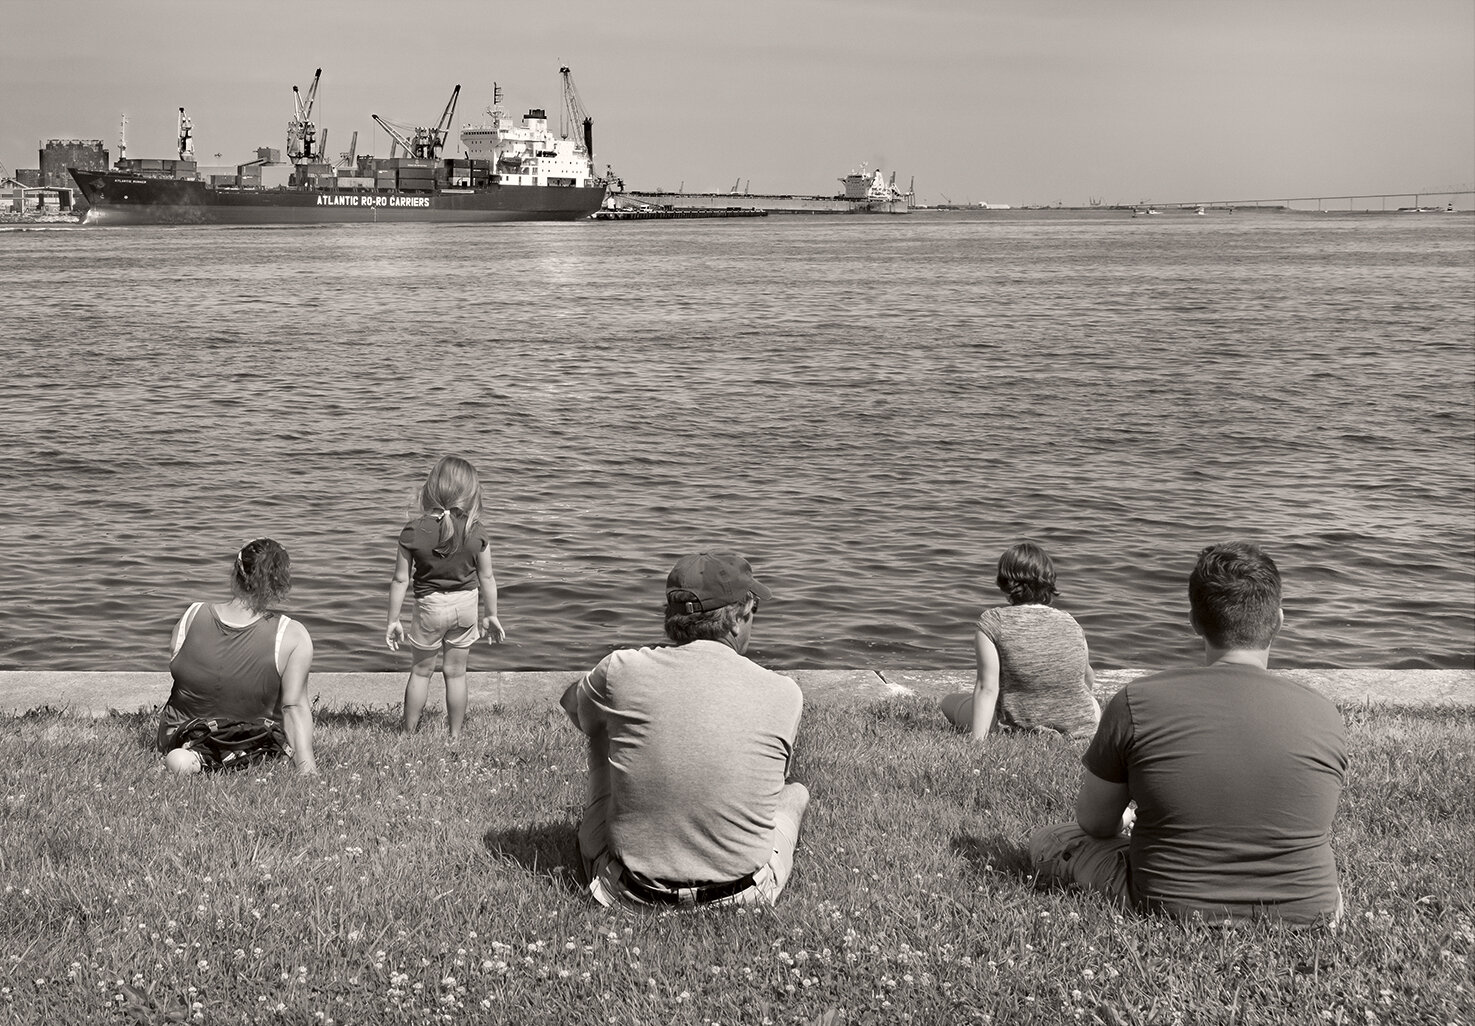 Photo © Albert Ewing-Watching The Ships Come In-Fort McHenry, Baltimore MD-SOCIAL MEDIA-12:30:2019_ALE_8327.jpg